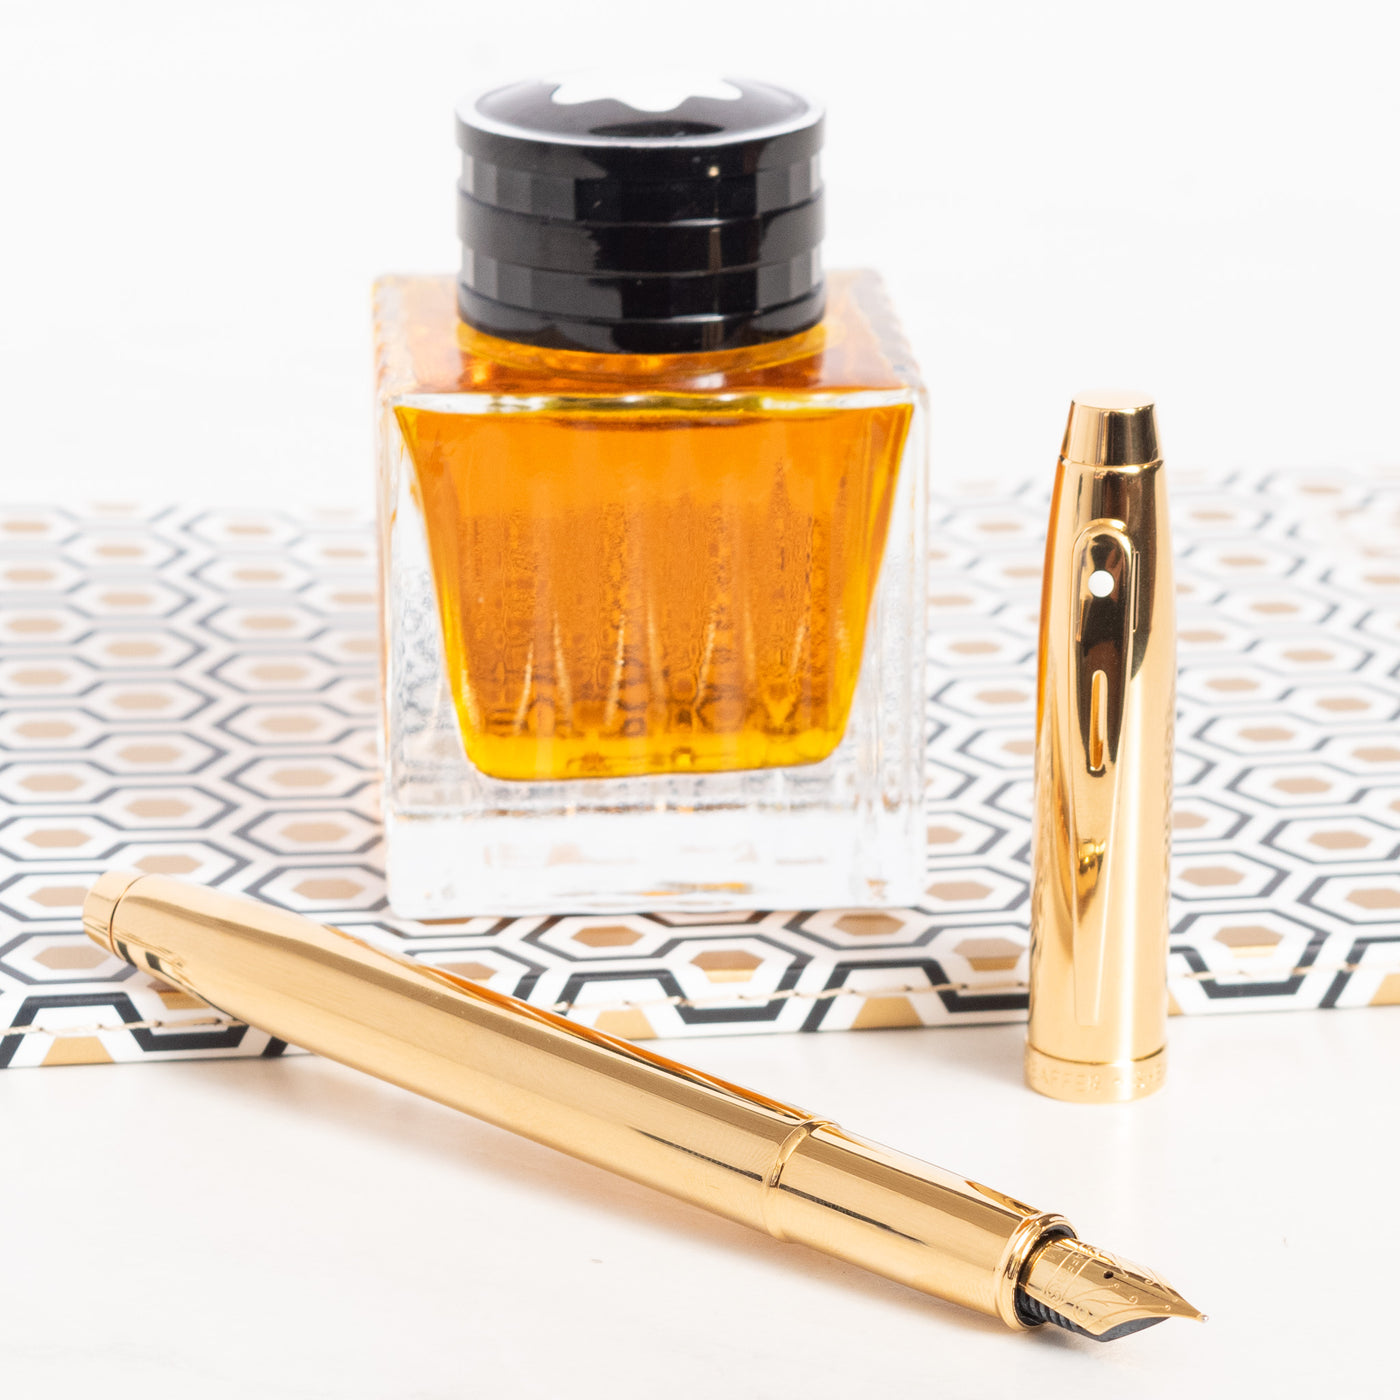 Sheaffer 100 Fountain Pen - PVD Gold with Gold Trim uncapped